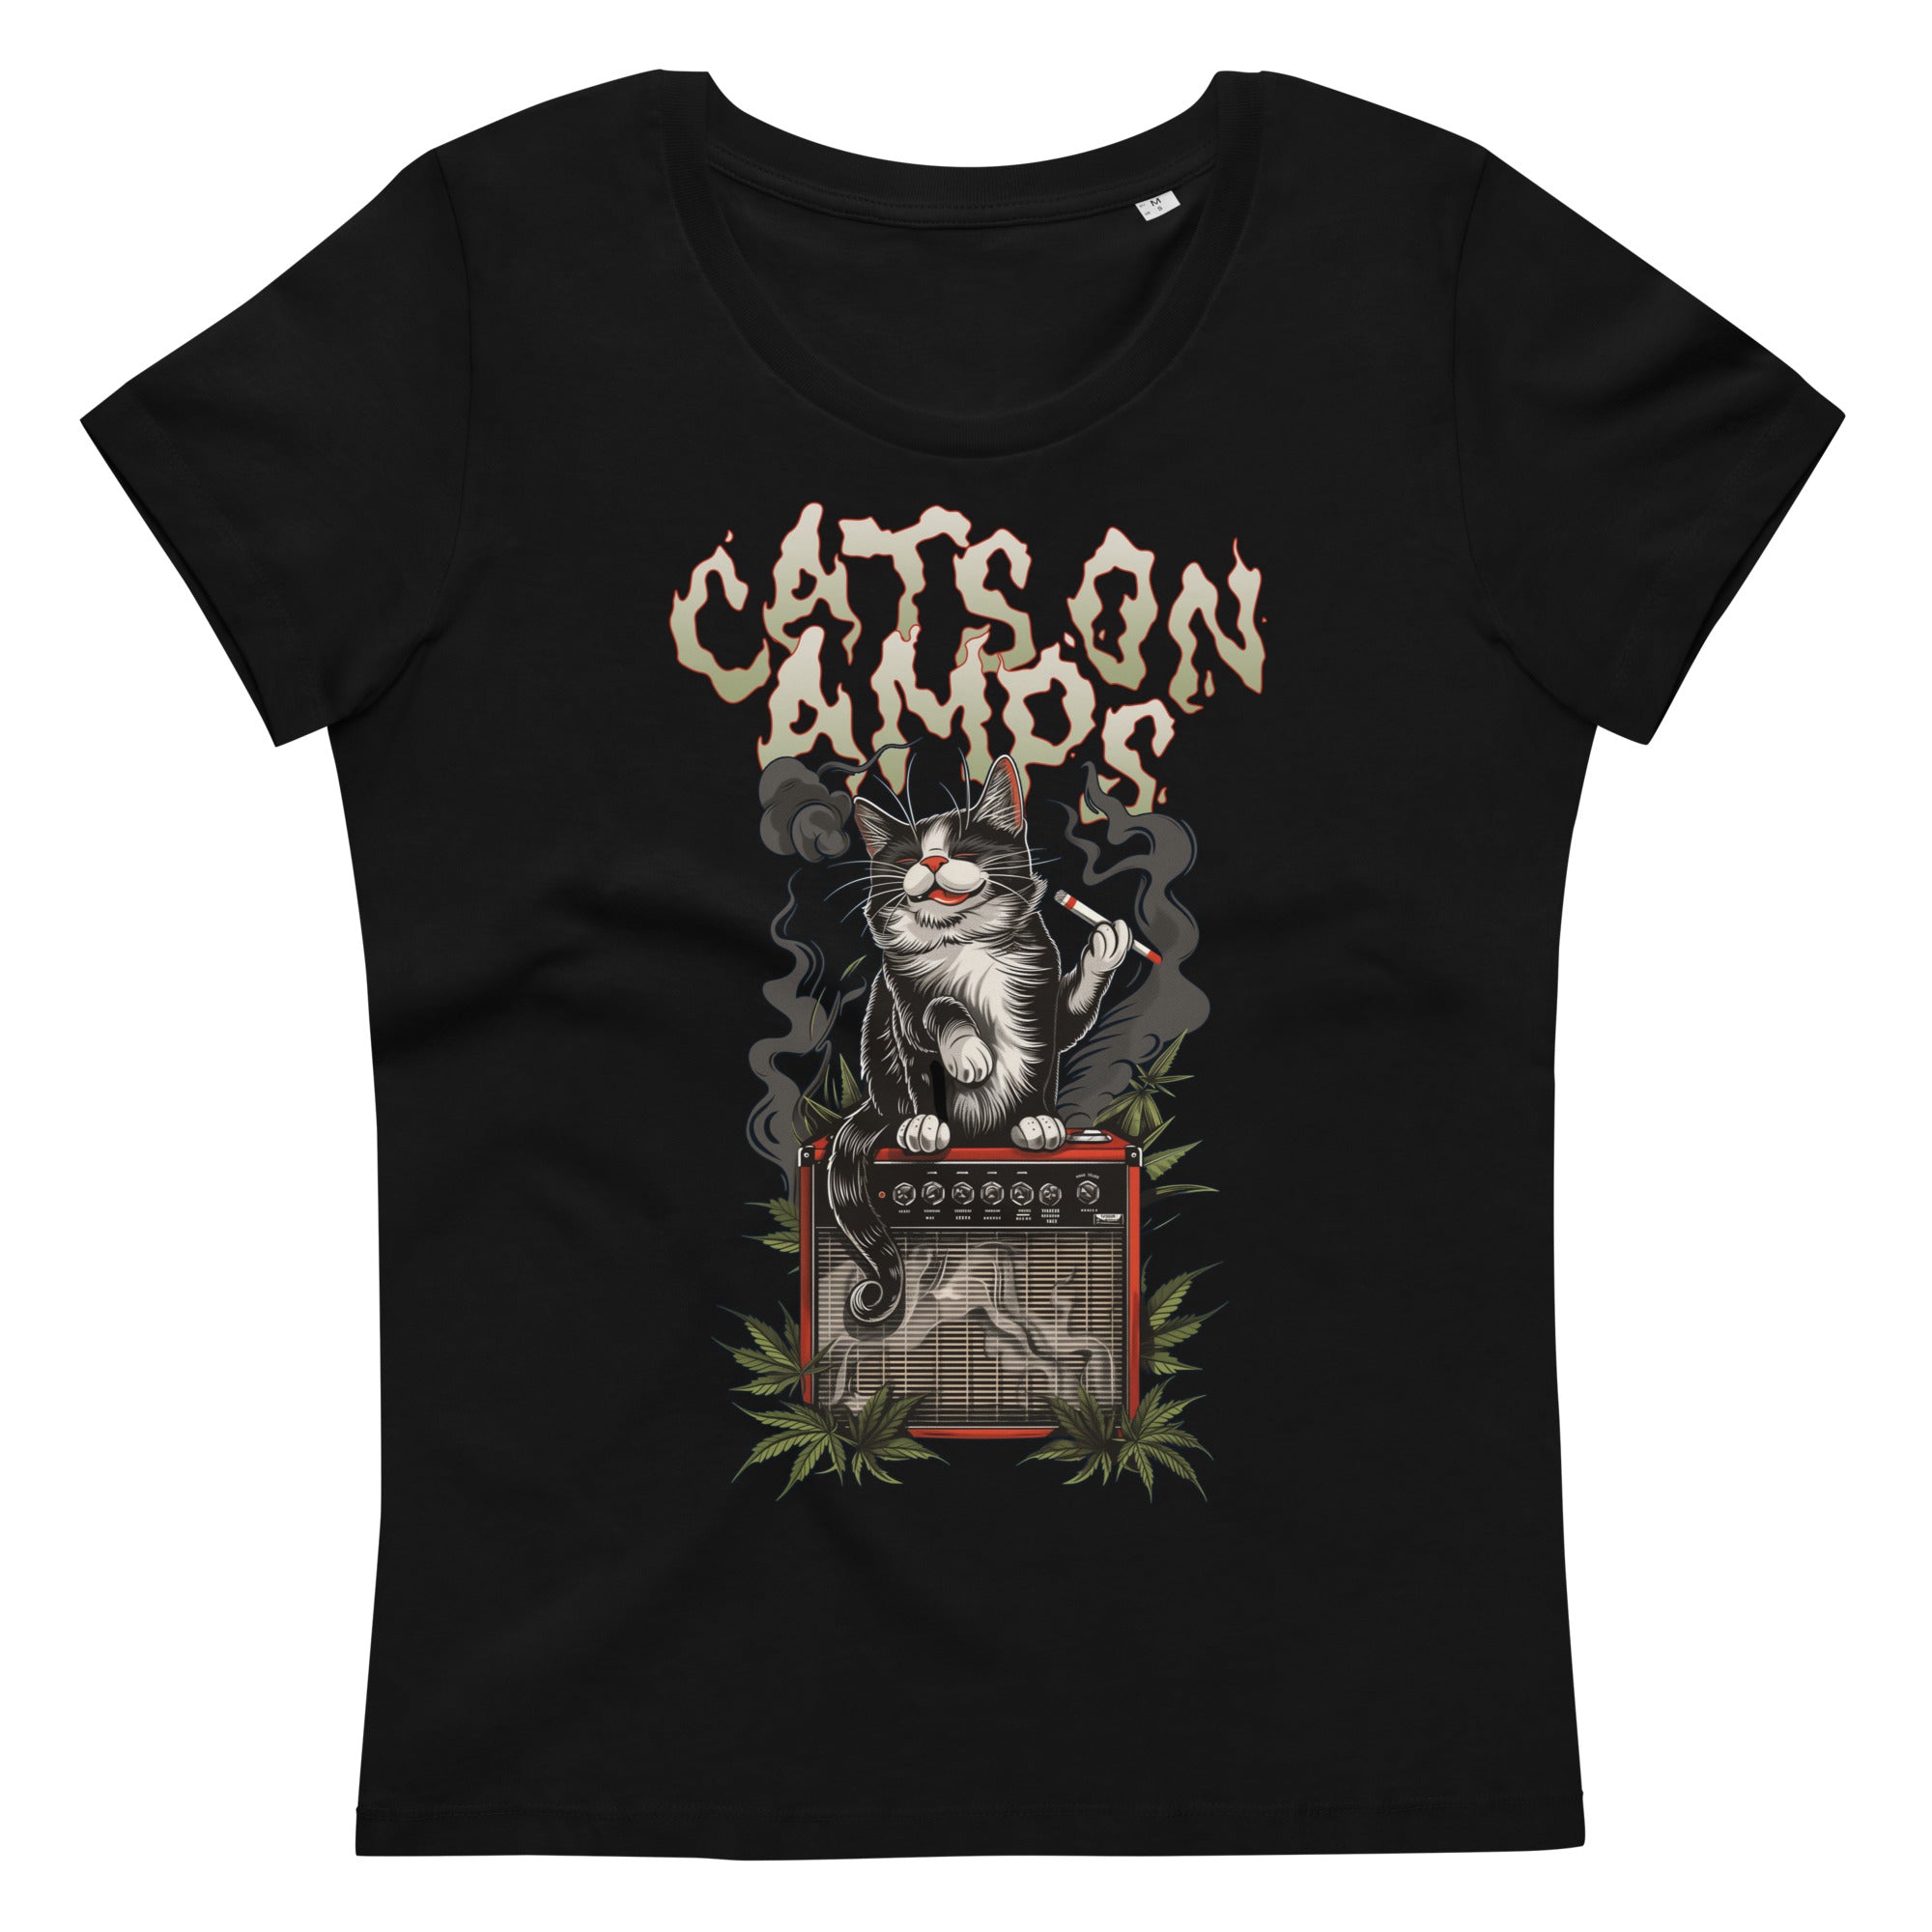 CATS ON AMPS - 420 relishing Cat - Women's fitted eco tee